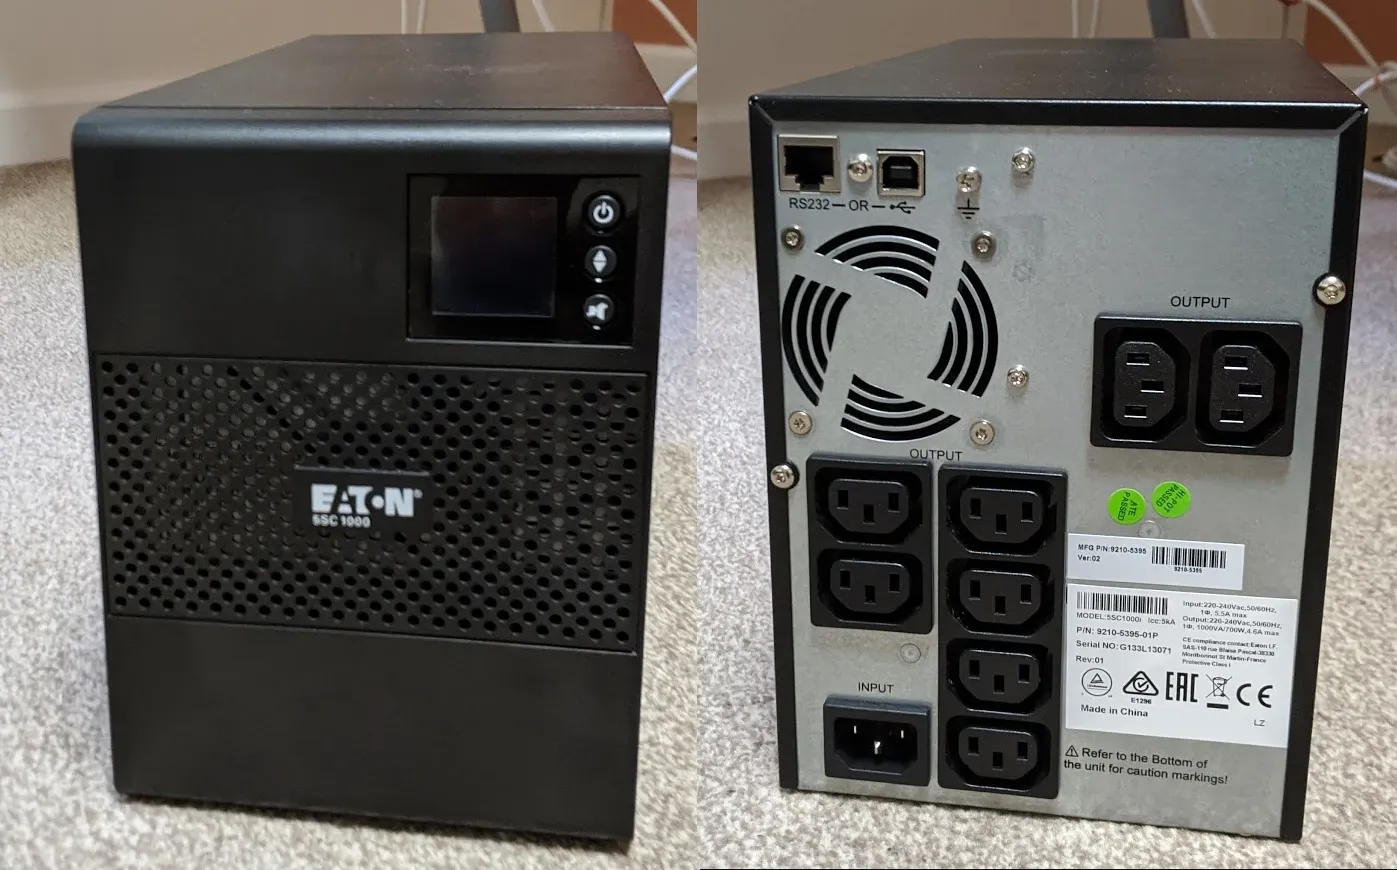 Eaton 5SC 1000i - Front and Back